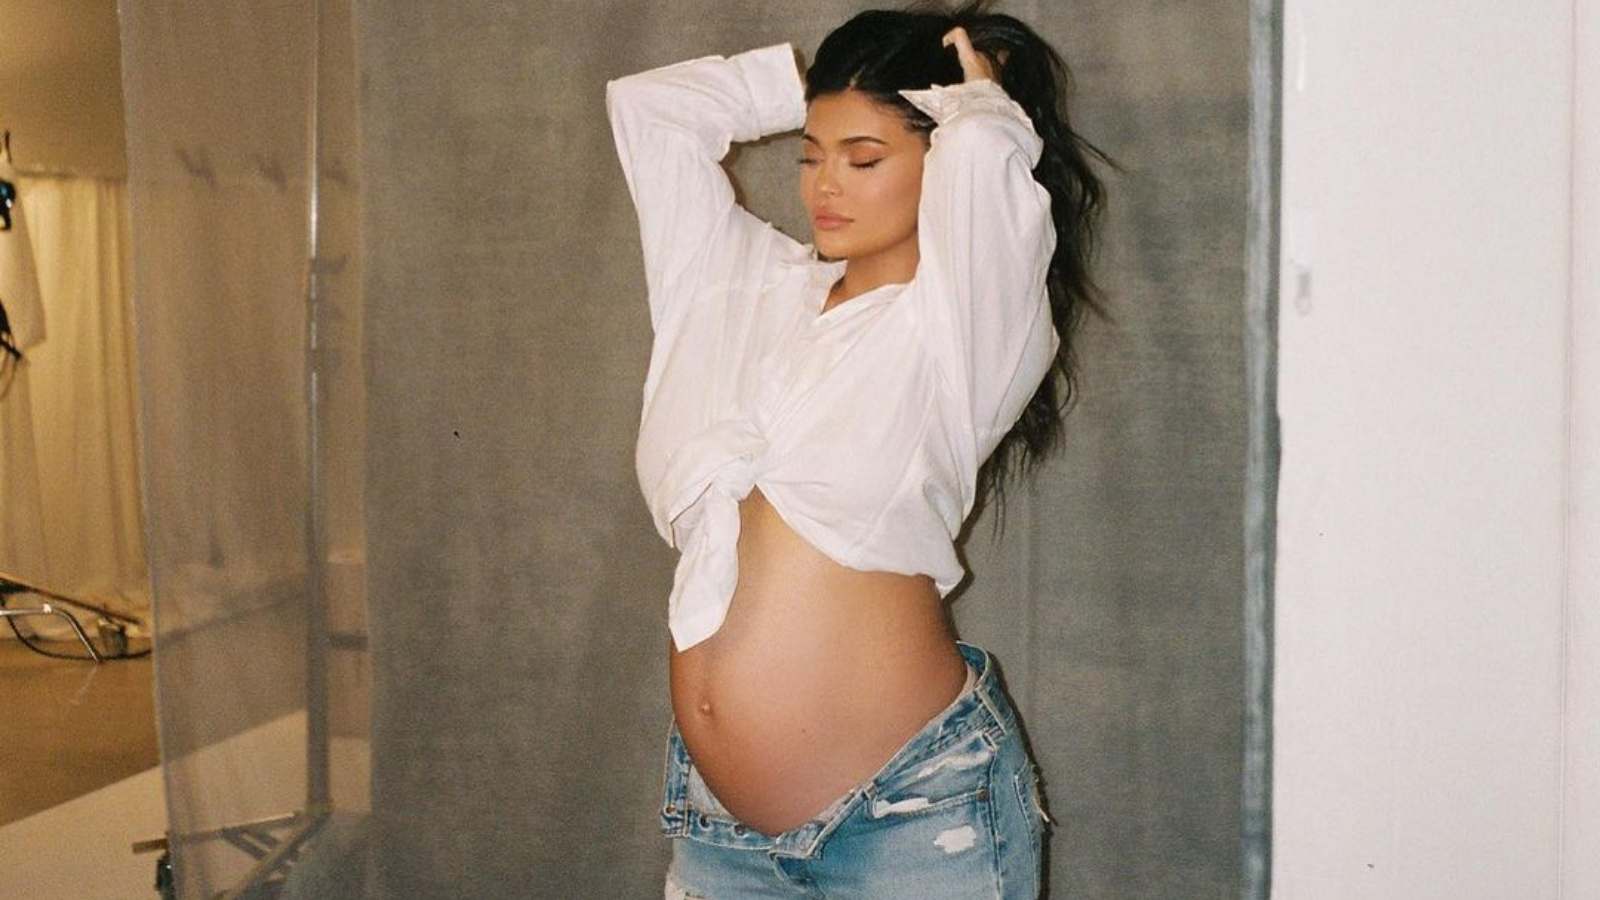 Kylie Jenner during her pregnancy